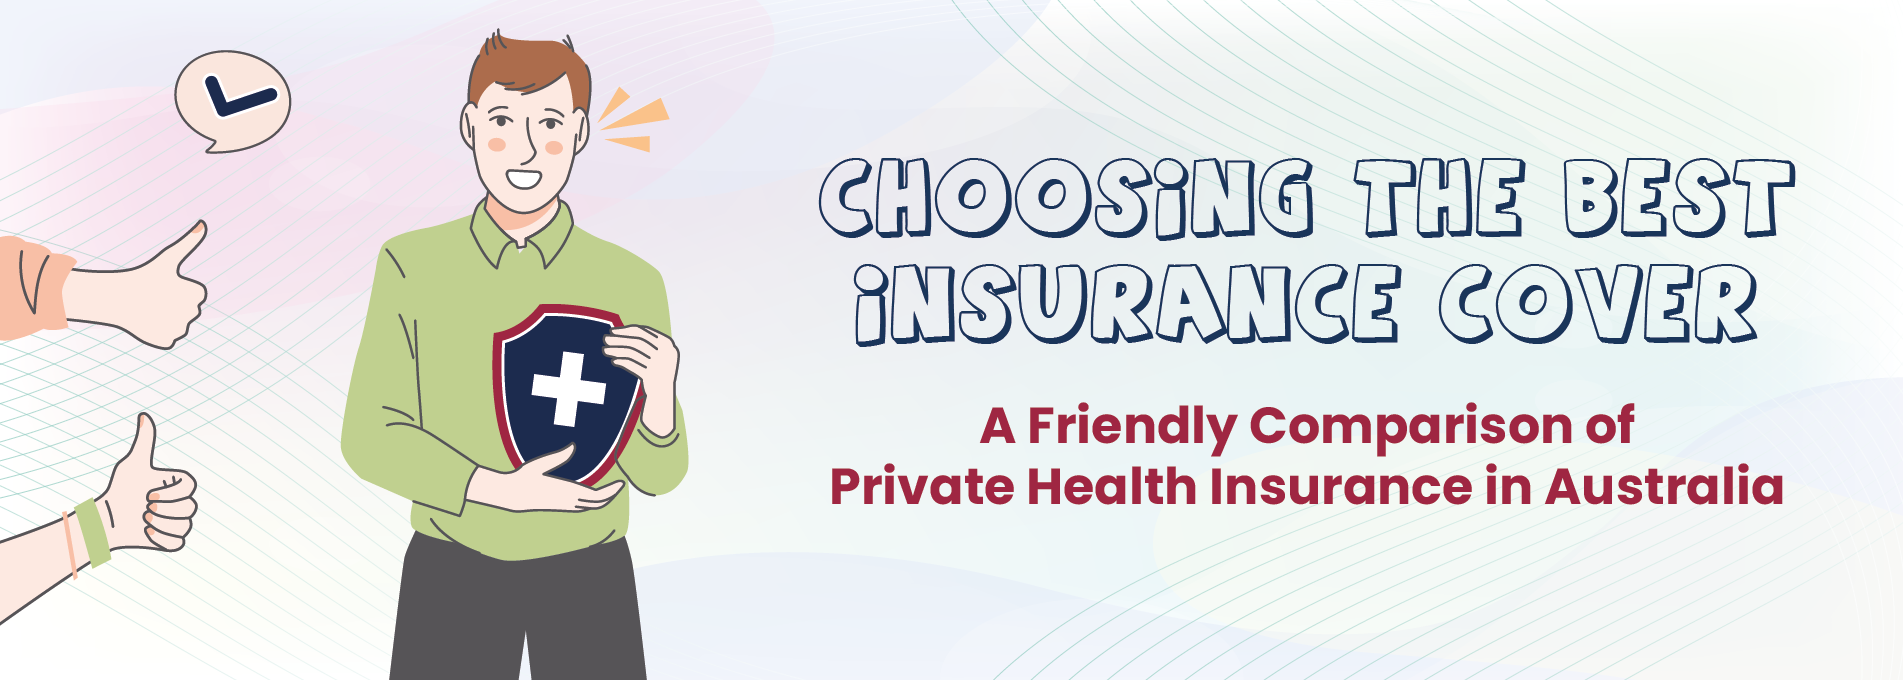 Choosing the Best Cover: A Friendly Comparison of Private Health Insurance in Australia